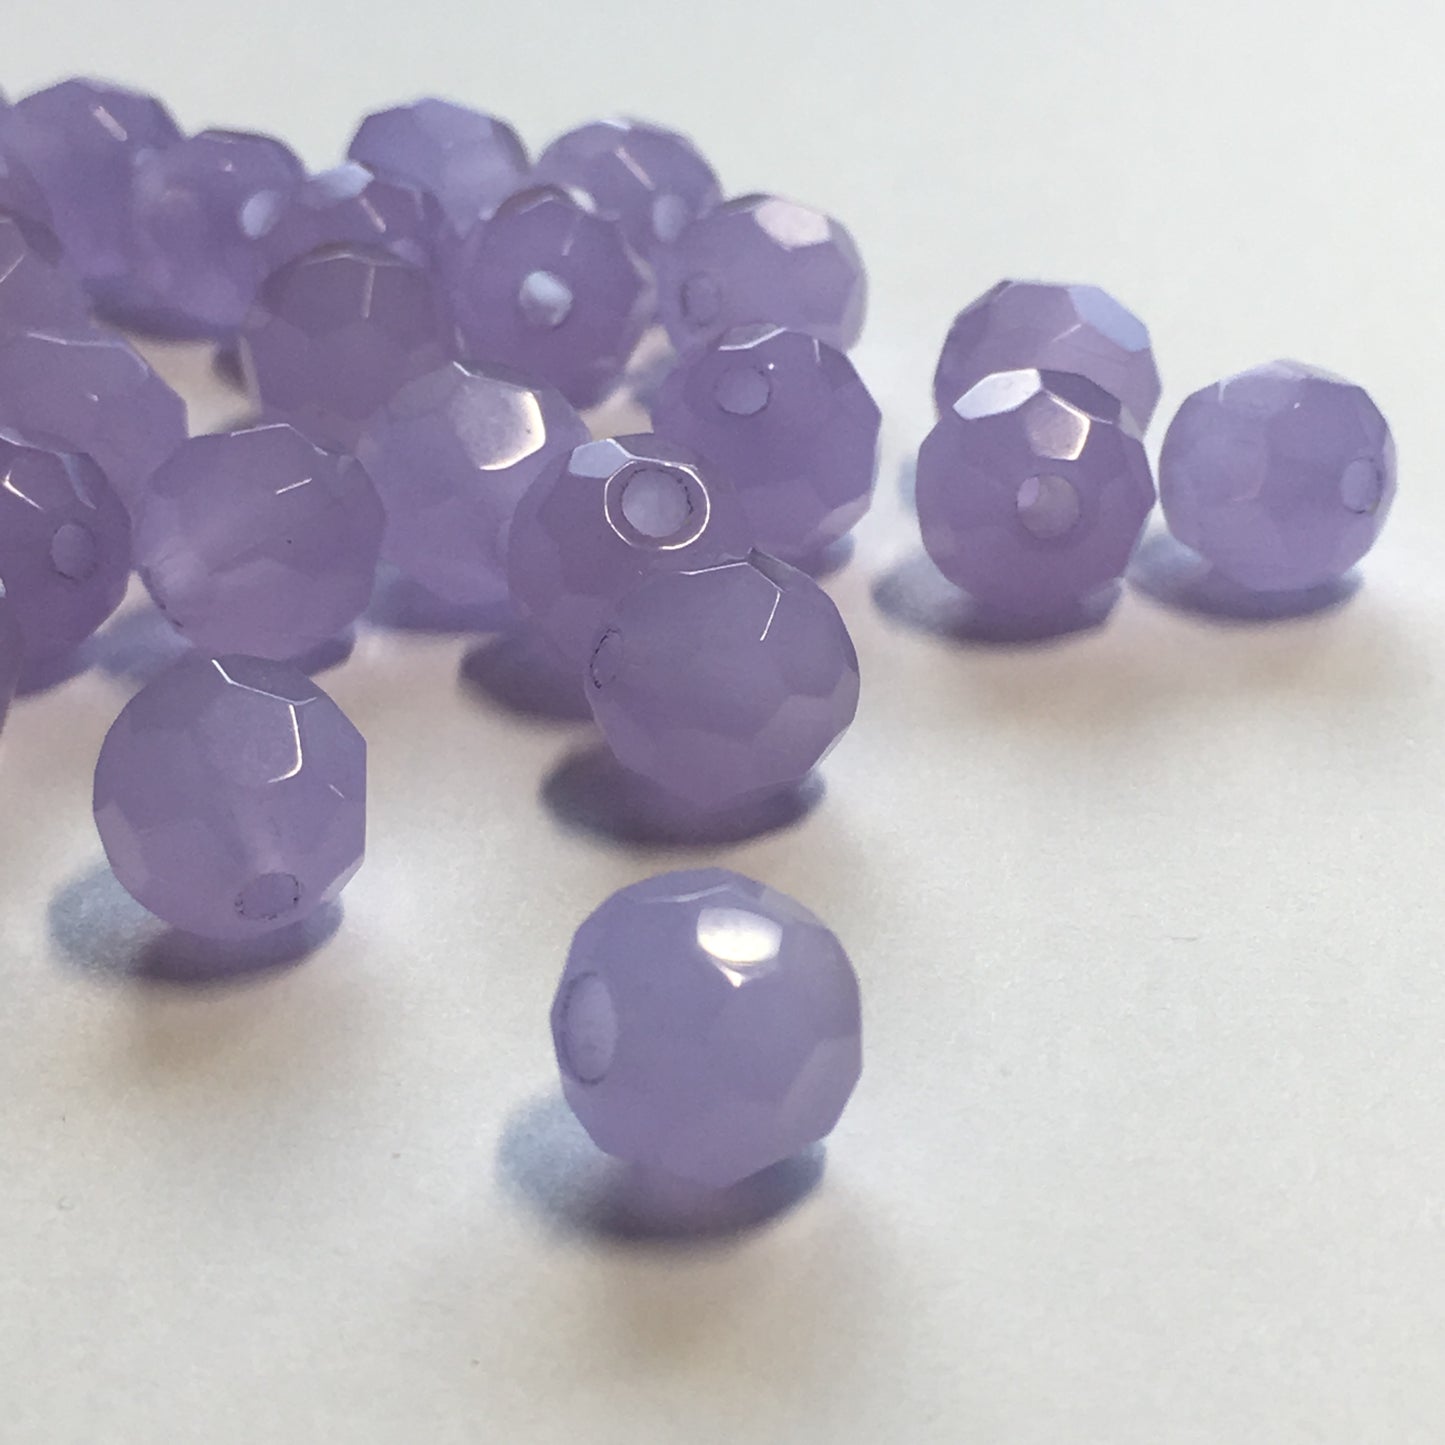 Amethyst Glass Round Faceted Beads, 10 mm - 25 Beads